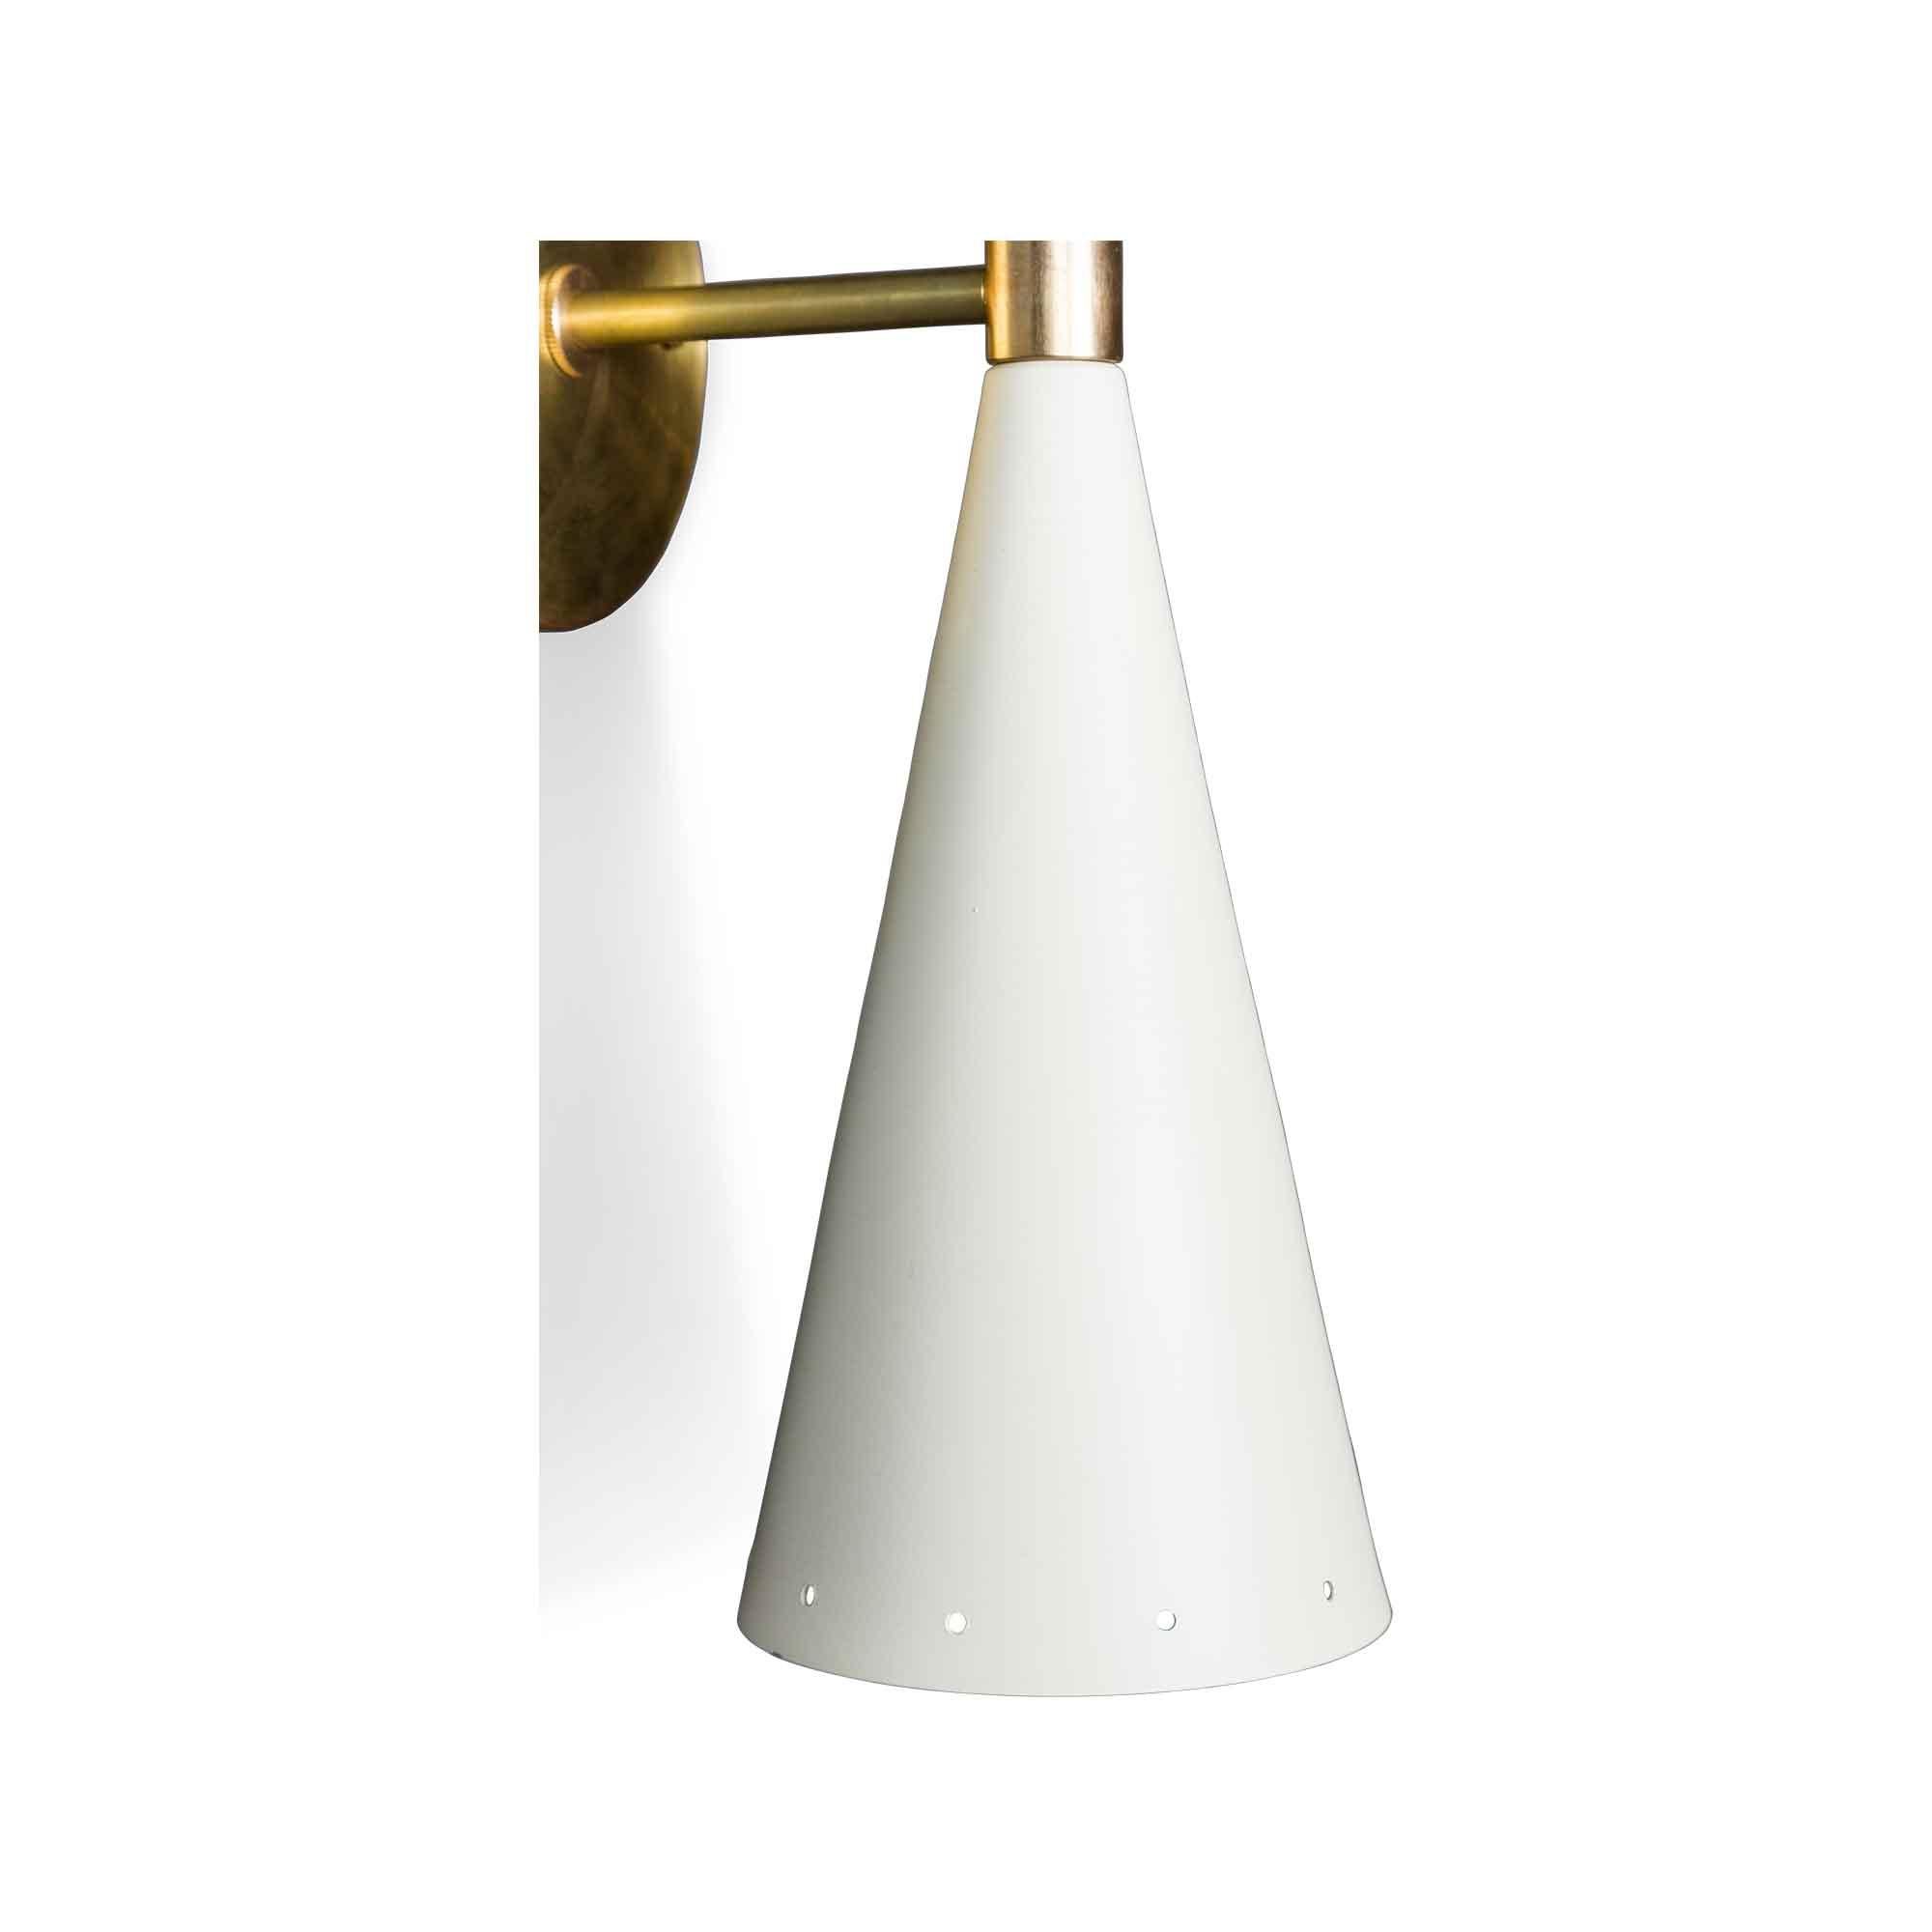 White and brass double cone sconce by Lawson-Fenning. The double cone sconce features two tapered cones, in either black or white, with small perforations at both ends with a brass backplate and spacer. 

The Lawson-Fenning Collection is designed